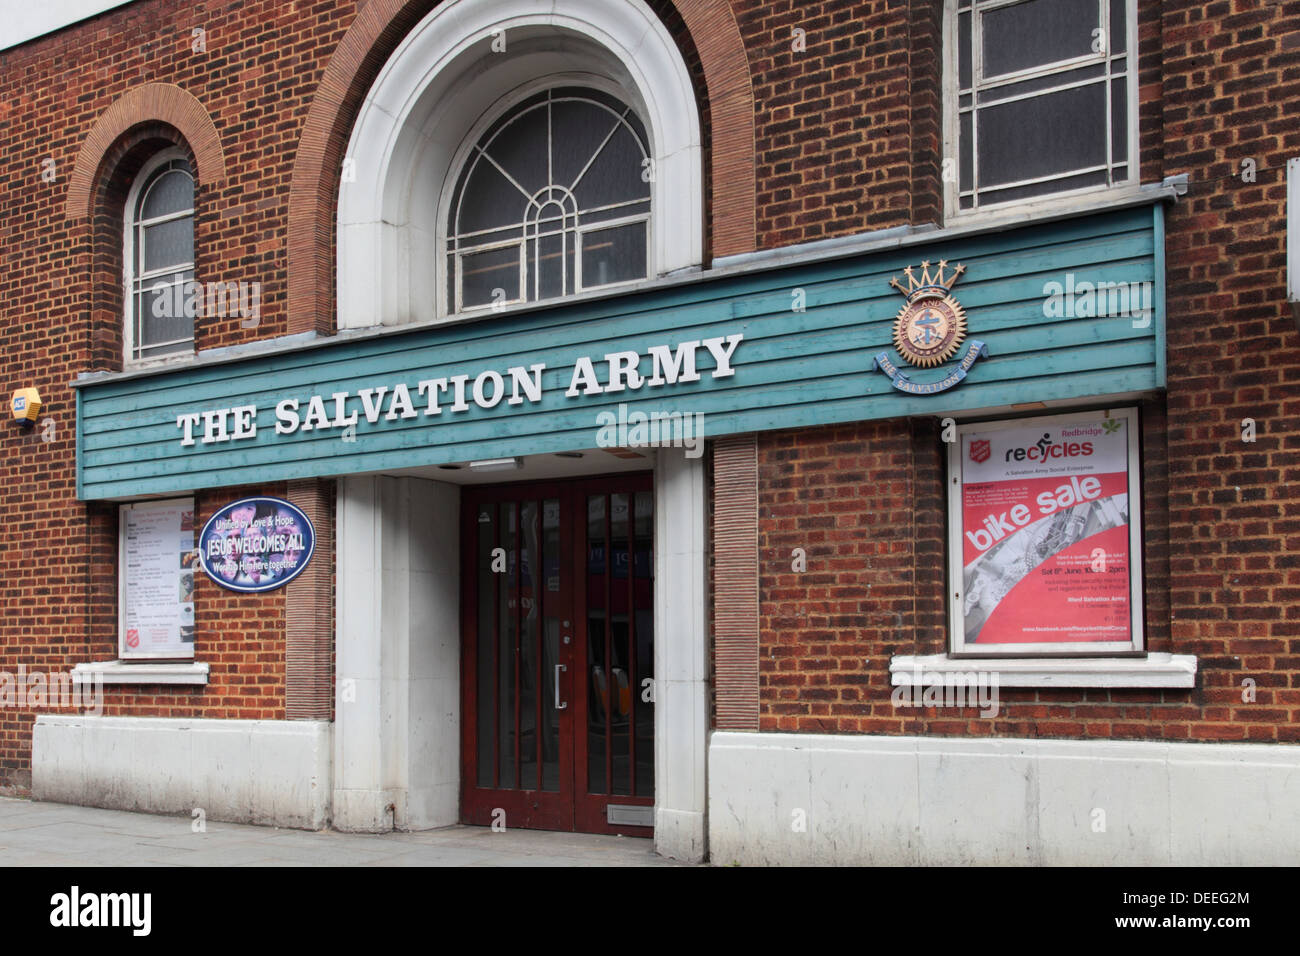 Salvation Army, Ilford Stock Photo